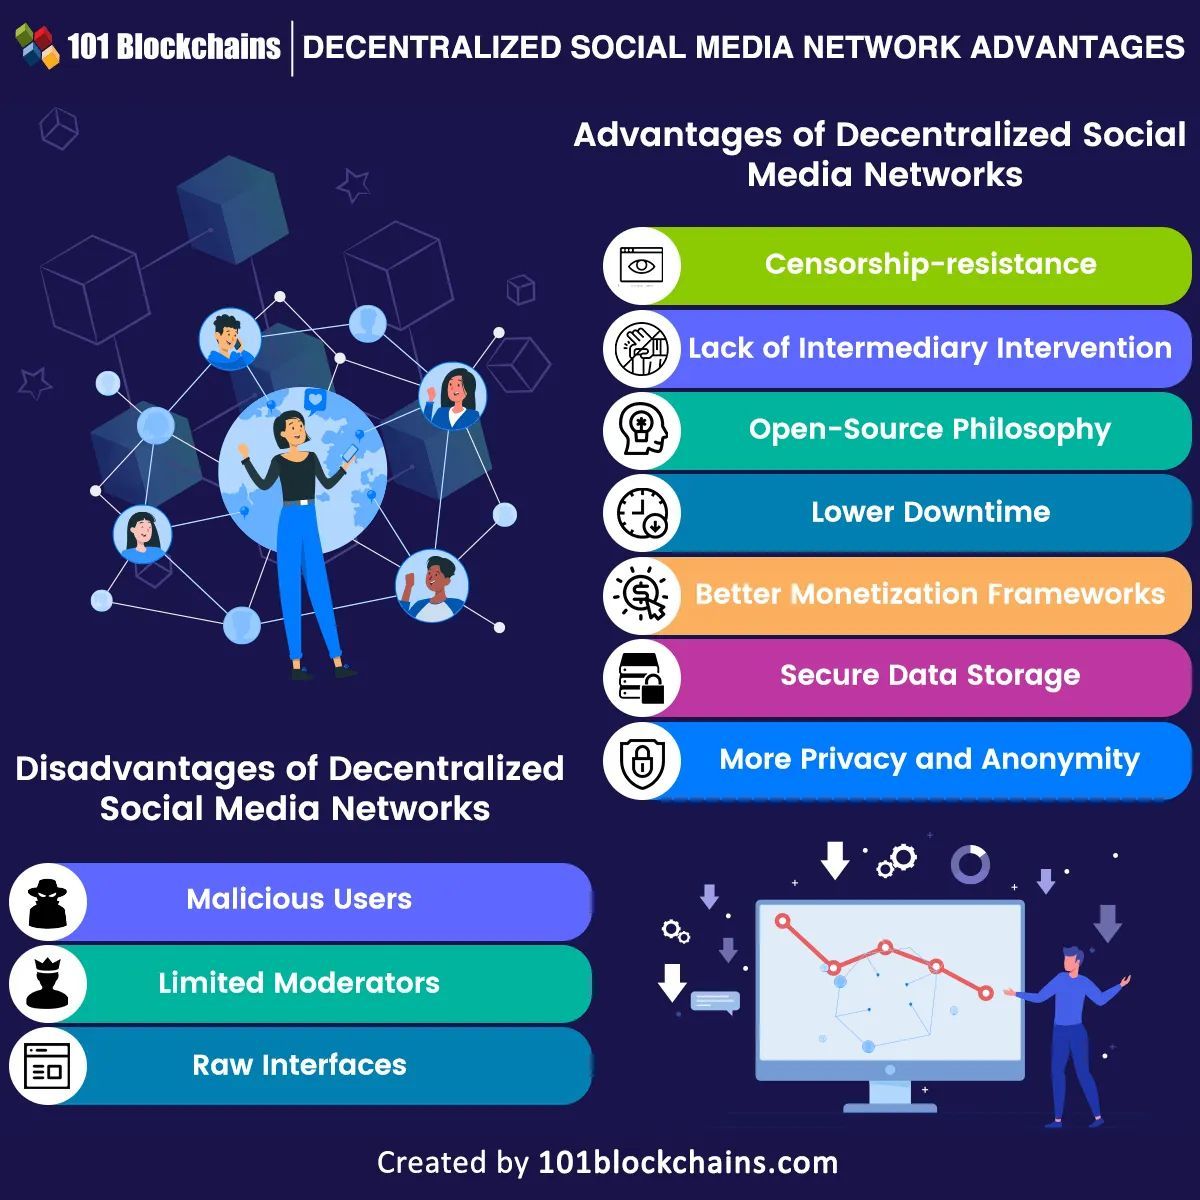 Decentralisation will be a key element of the society ahead, and here is an overview of the main benefits to be gained from blockchain-based decentralised social networks. Link >> bit.ly/3WVClTB @101Blockchains via @LindaGrass0 #Blockchain #Decentralization